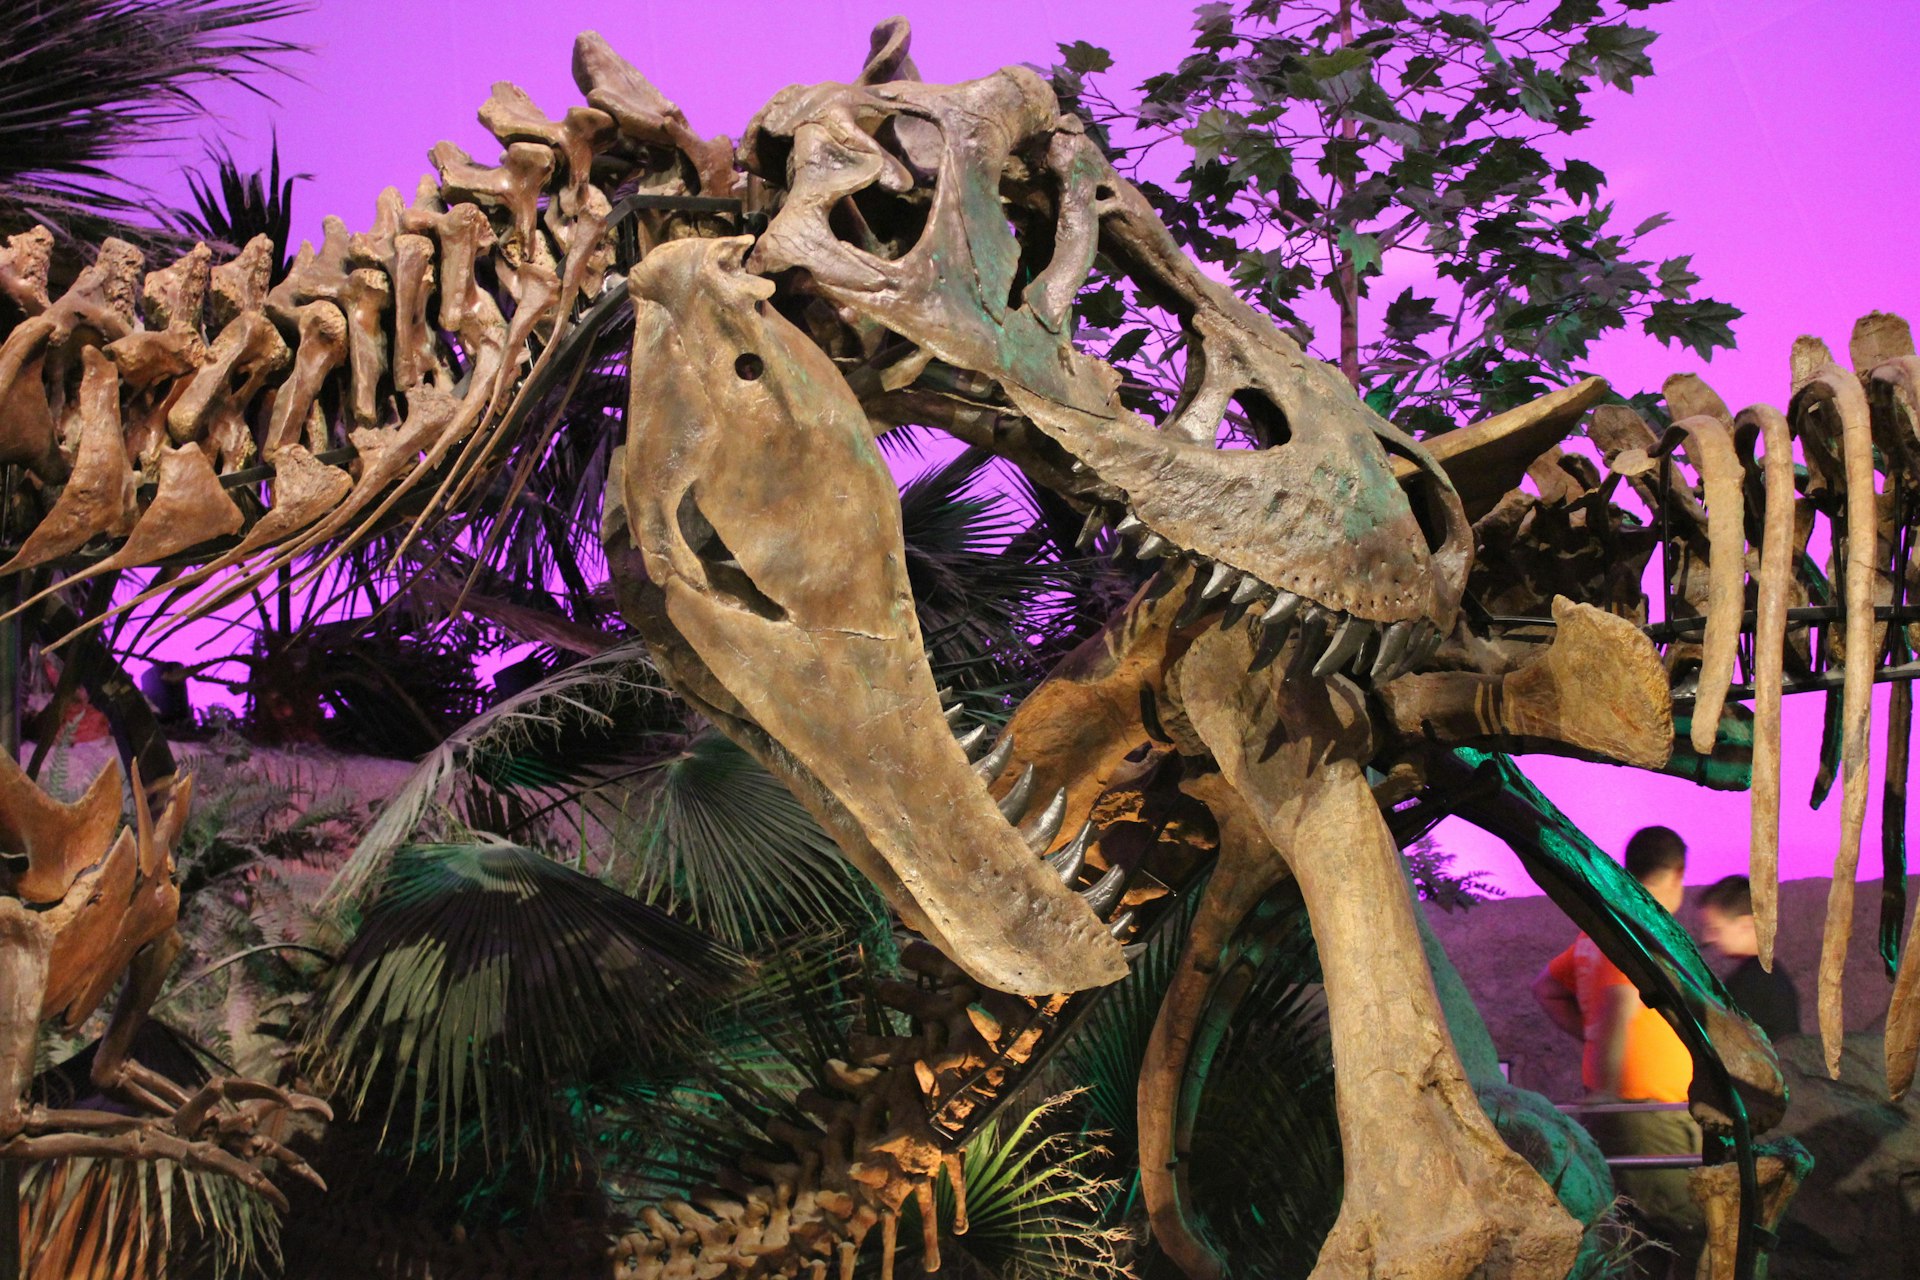 Tyrannosaurus Rex fighting a triceratops dinosaur at the Children's Museum in Indianapolis, Indiana.